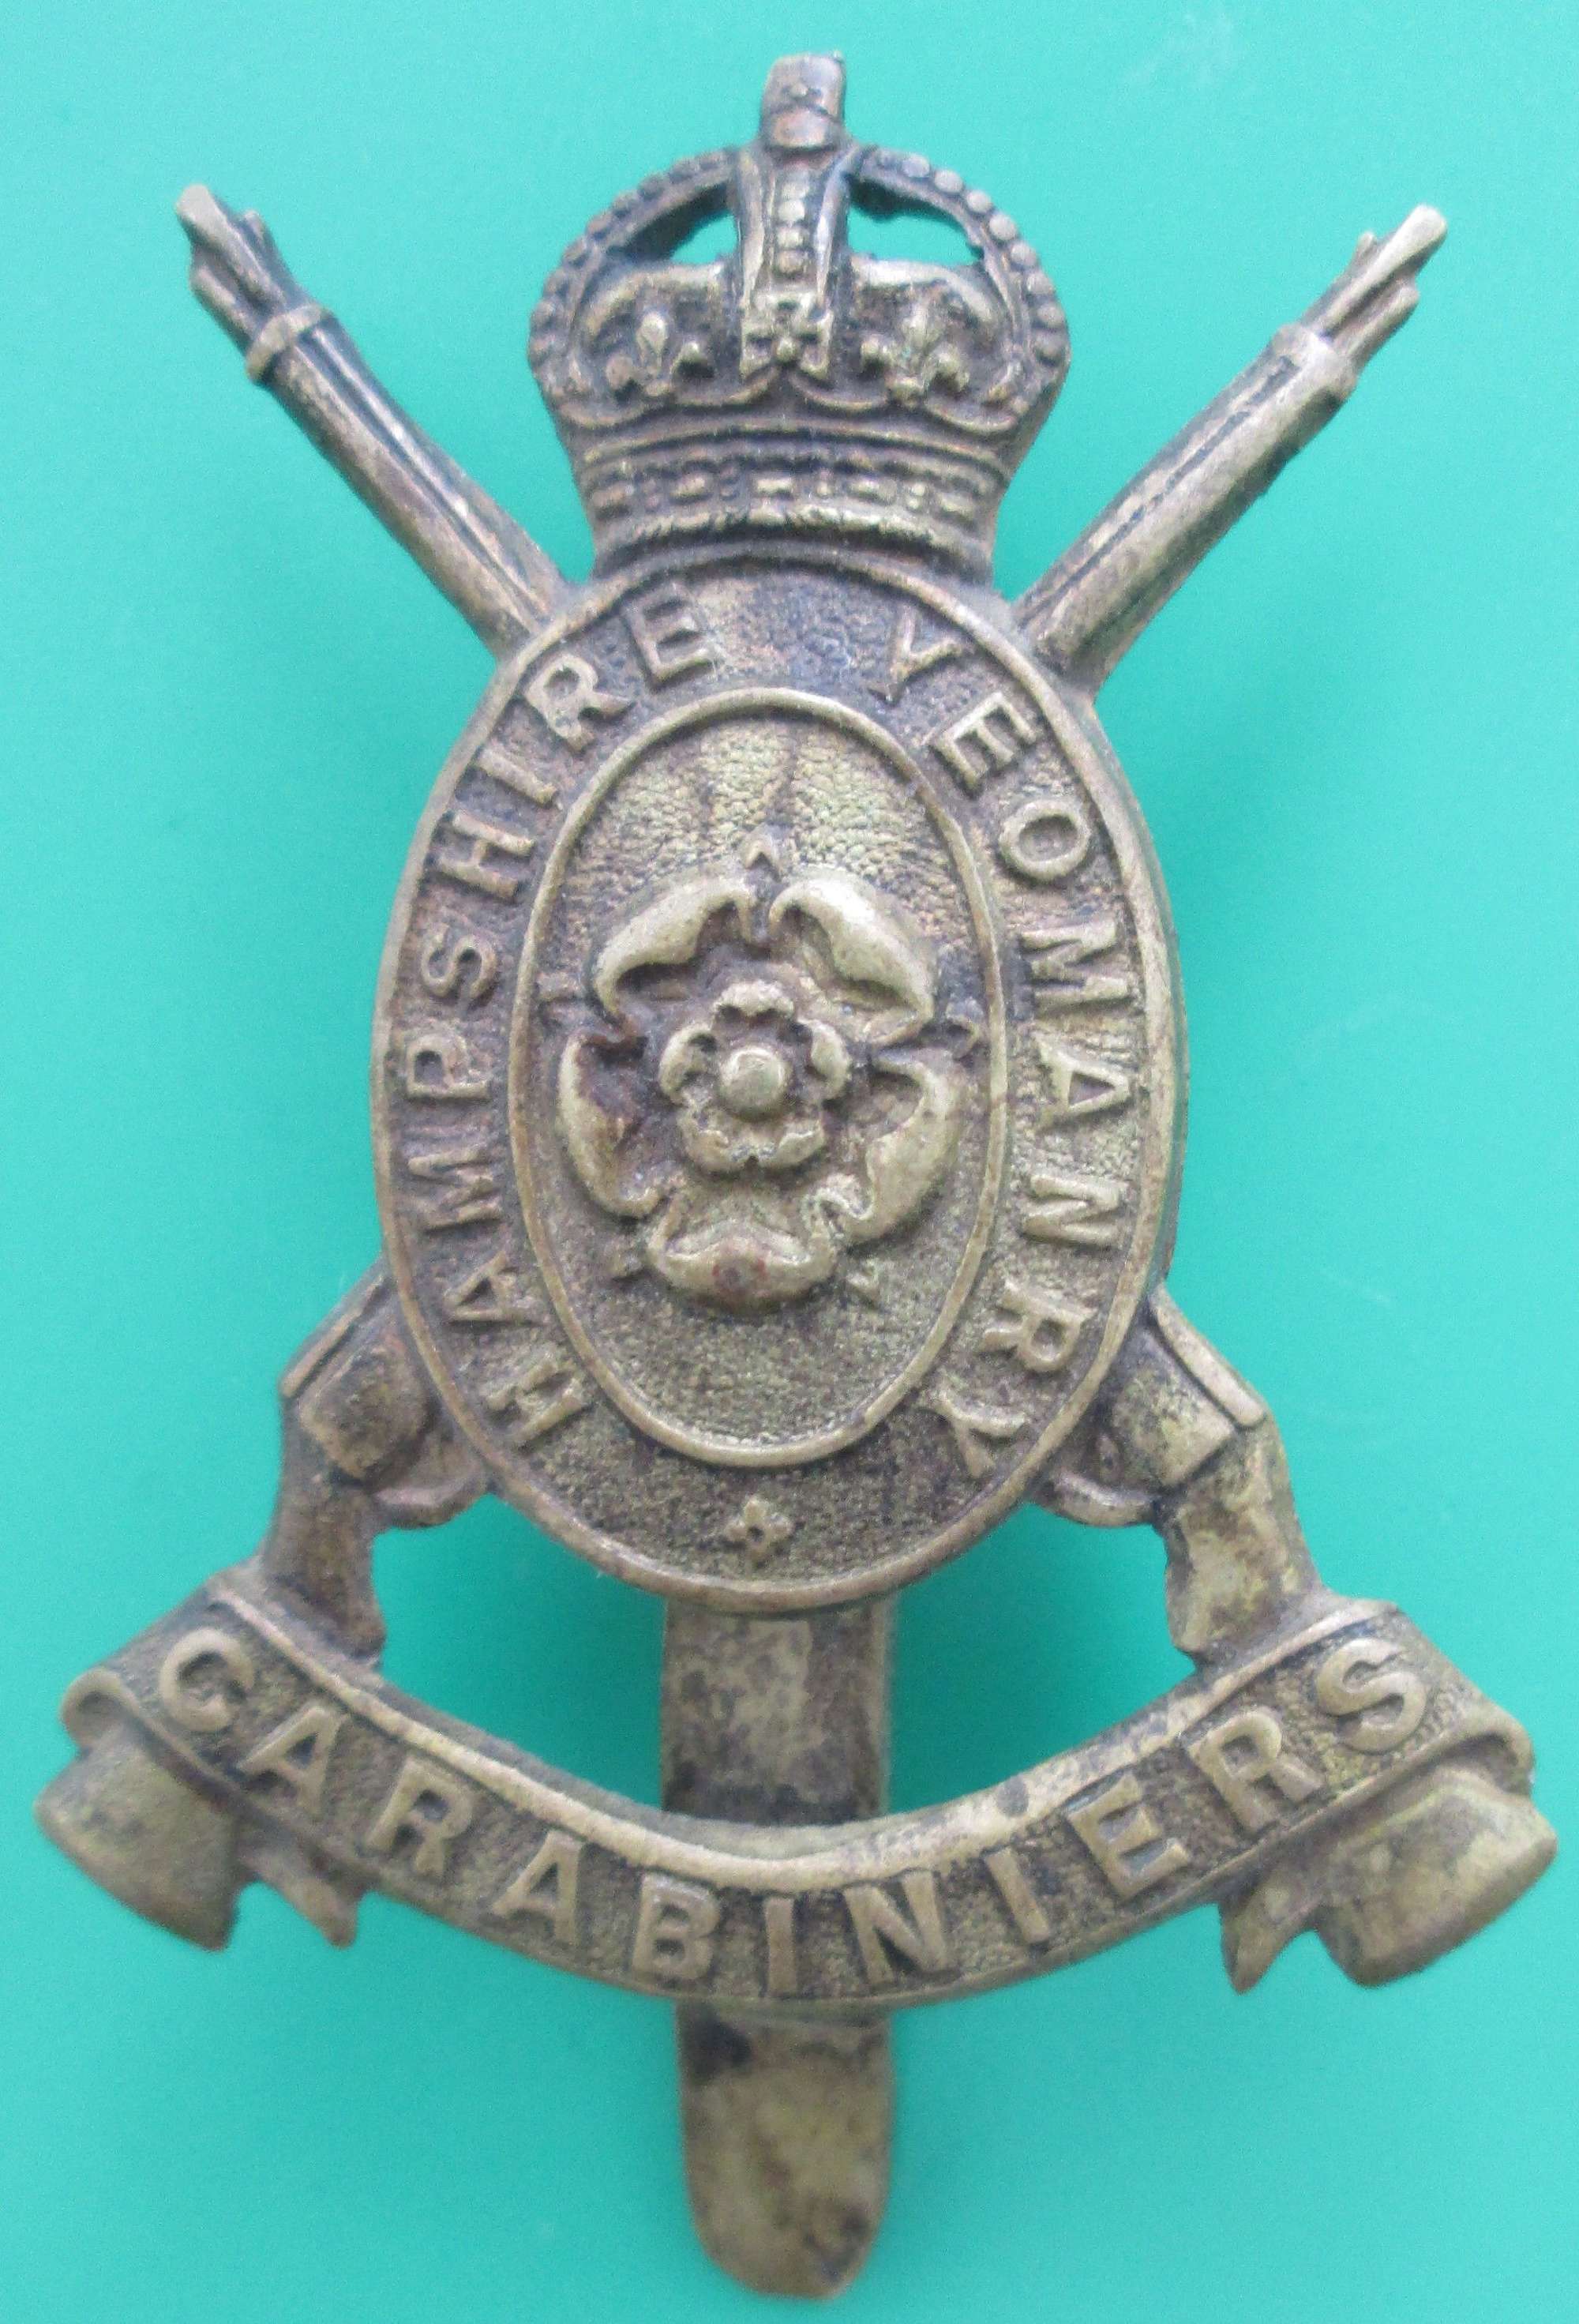 A HAMPSHIRE CARABINIERS OTHER RANKS CAP BADGE